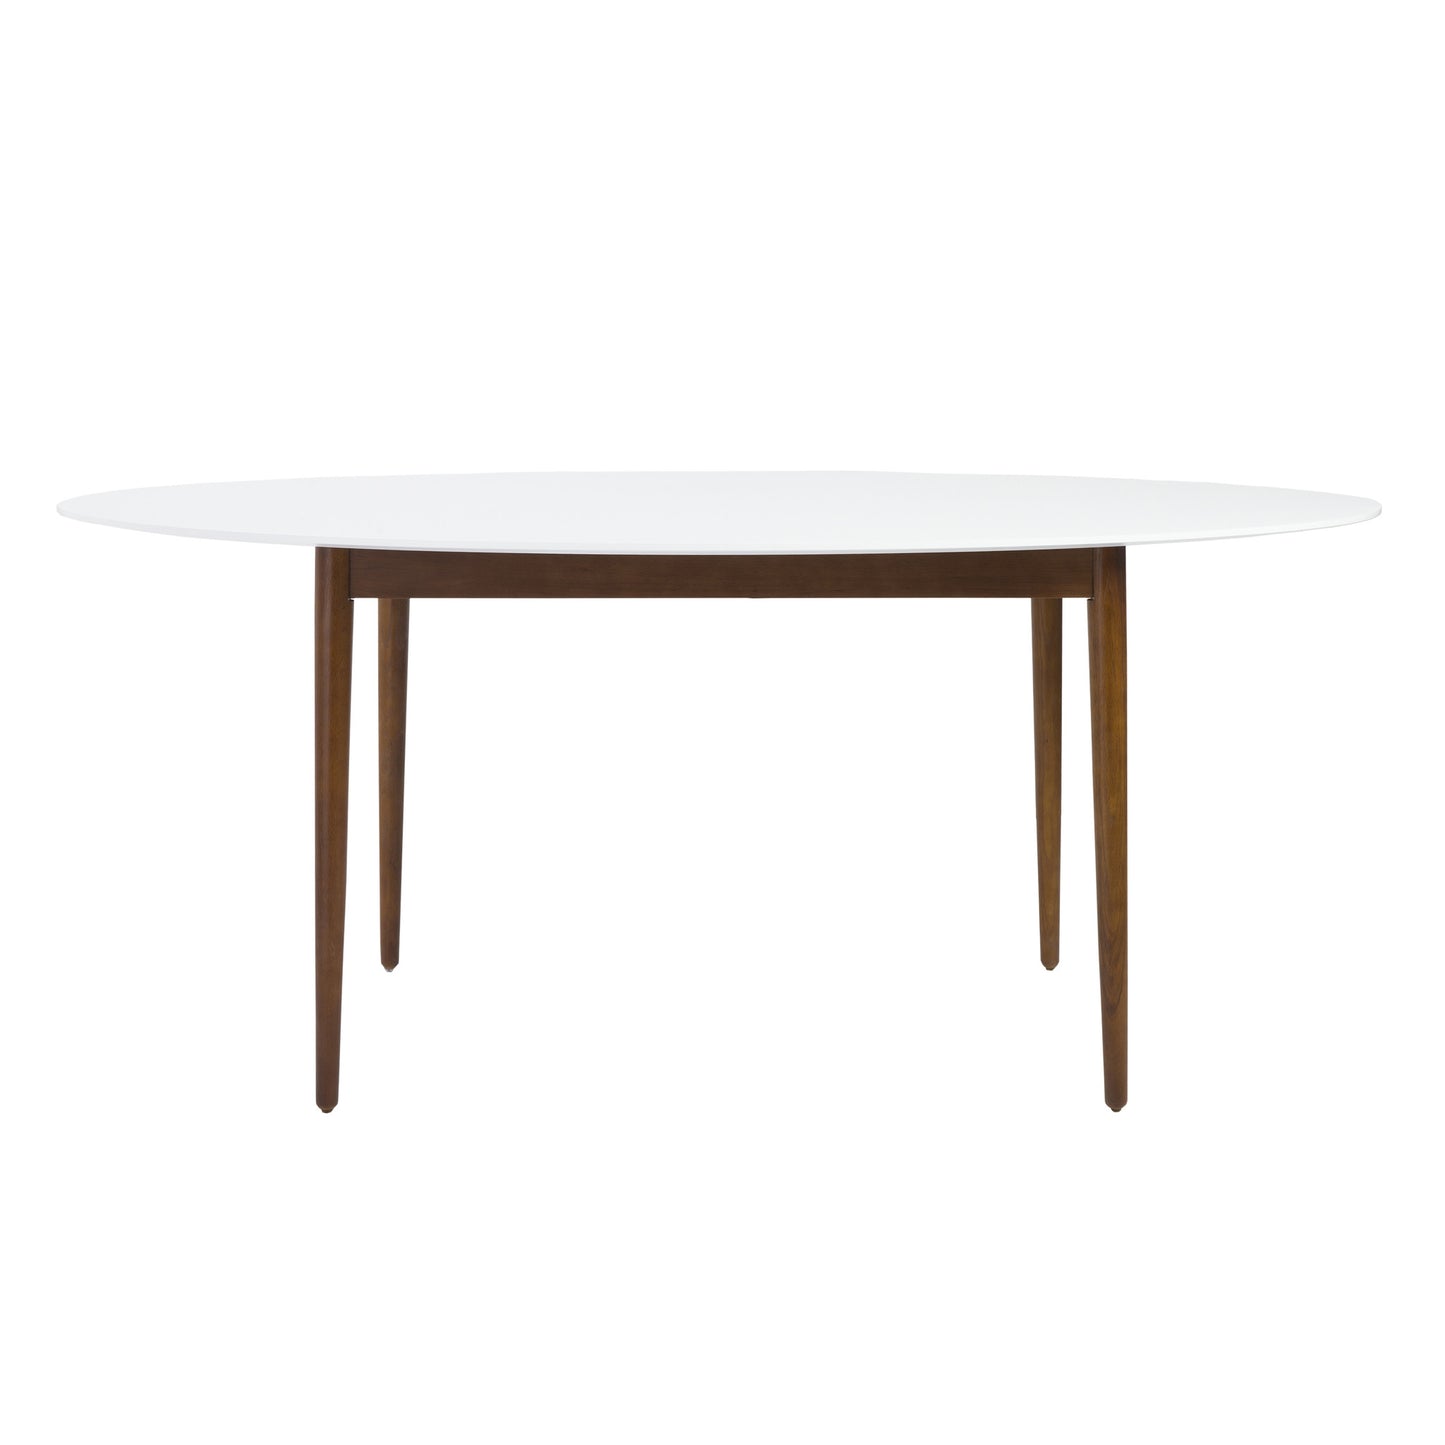 Load image into Gallery viewer, Manon Oval Dining Table White/WalnutDining Table Eurostyle  White/Walnut   Four Hands, Burke Decor, Mid Century Modern Furniture, Old Bones Furniture Company, Old Bones Co, Modern Mid Century, Designer Furniture, https://www.oldbonesco.com/
